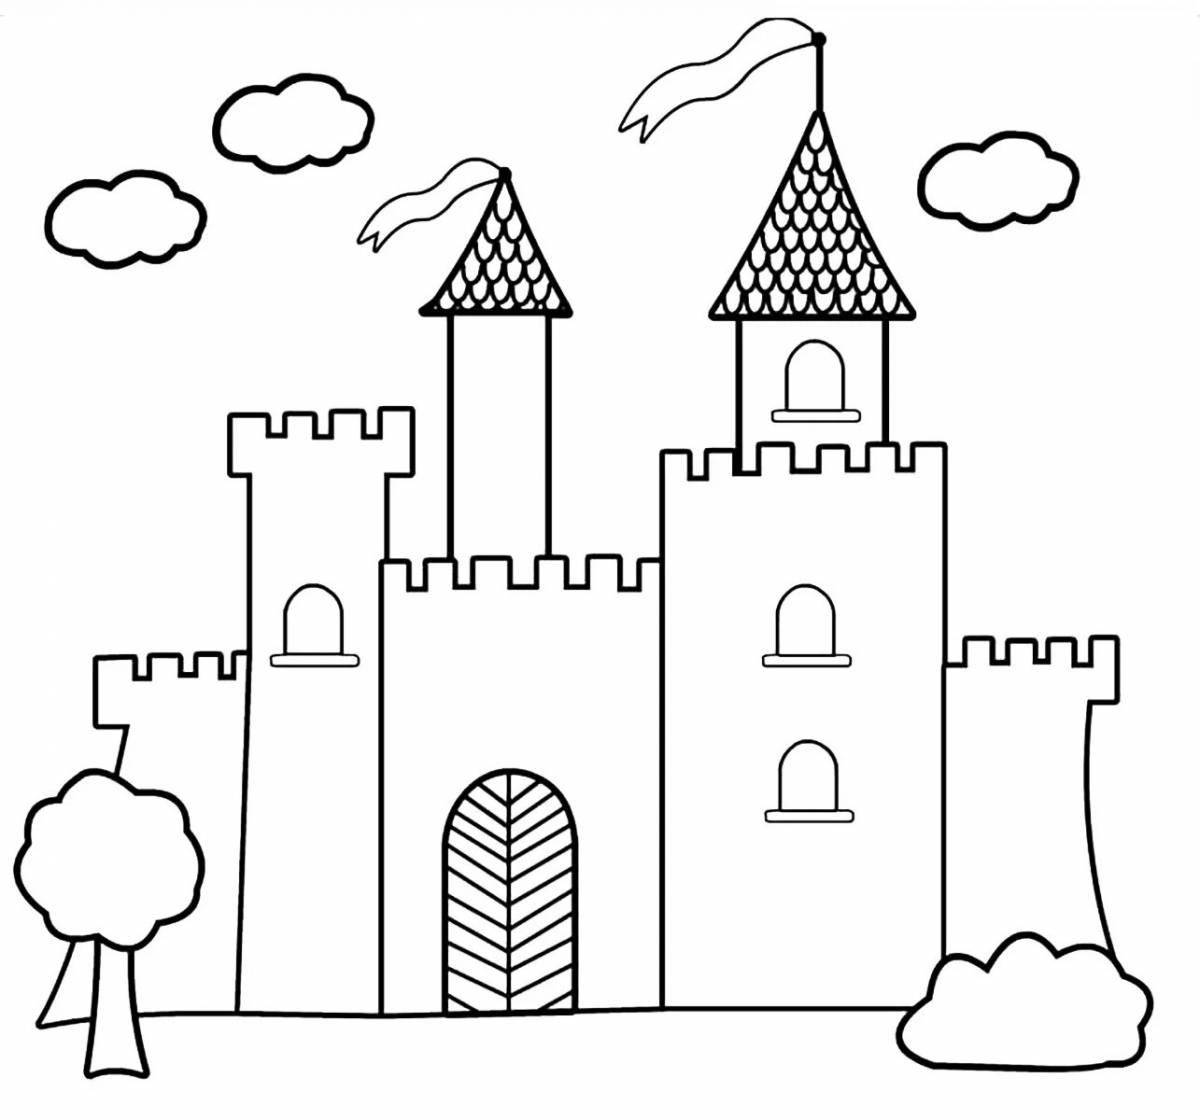 Adorable castle coloring book for 4-5 year olds